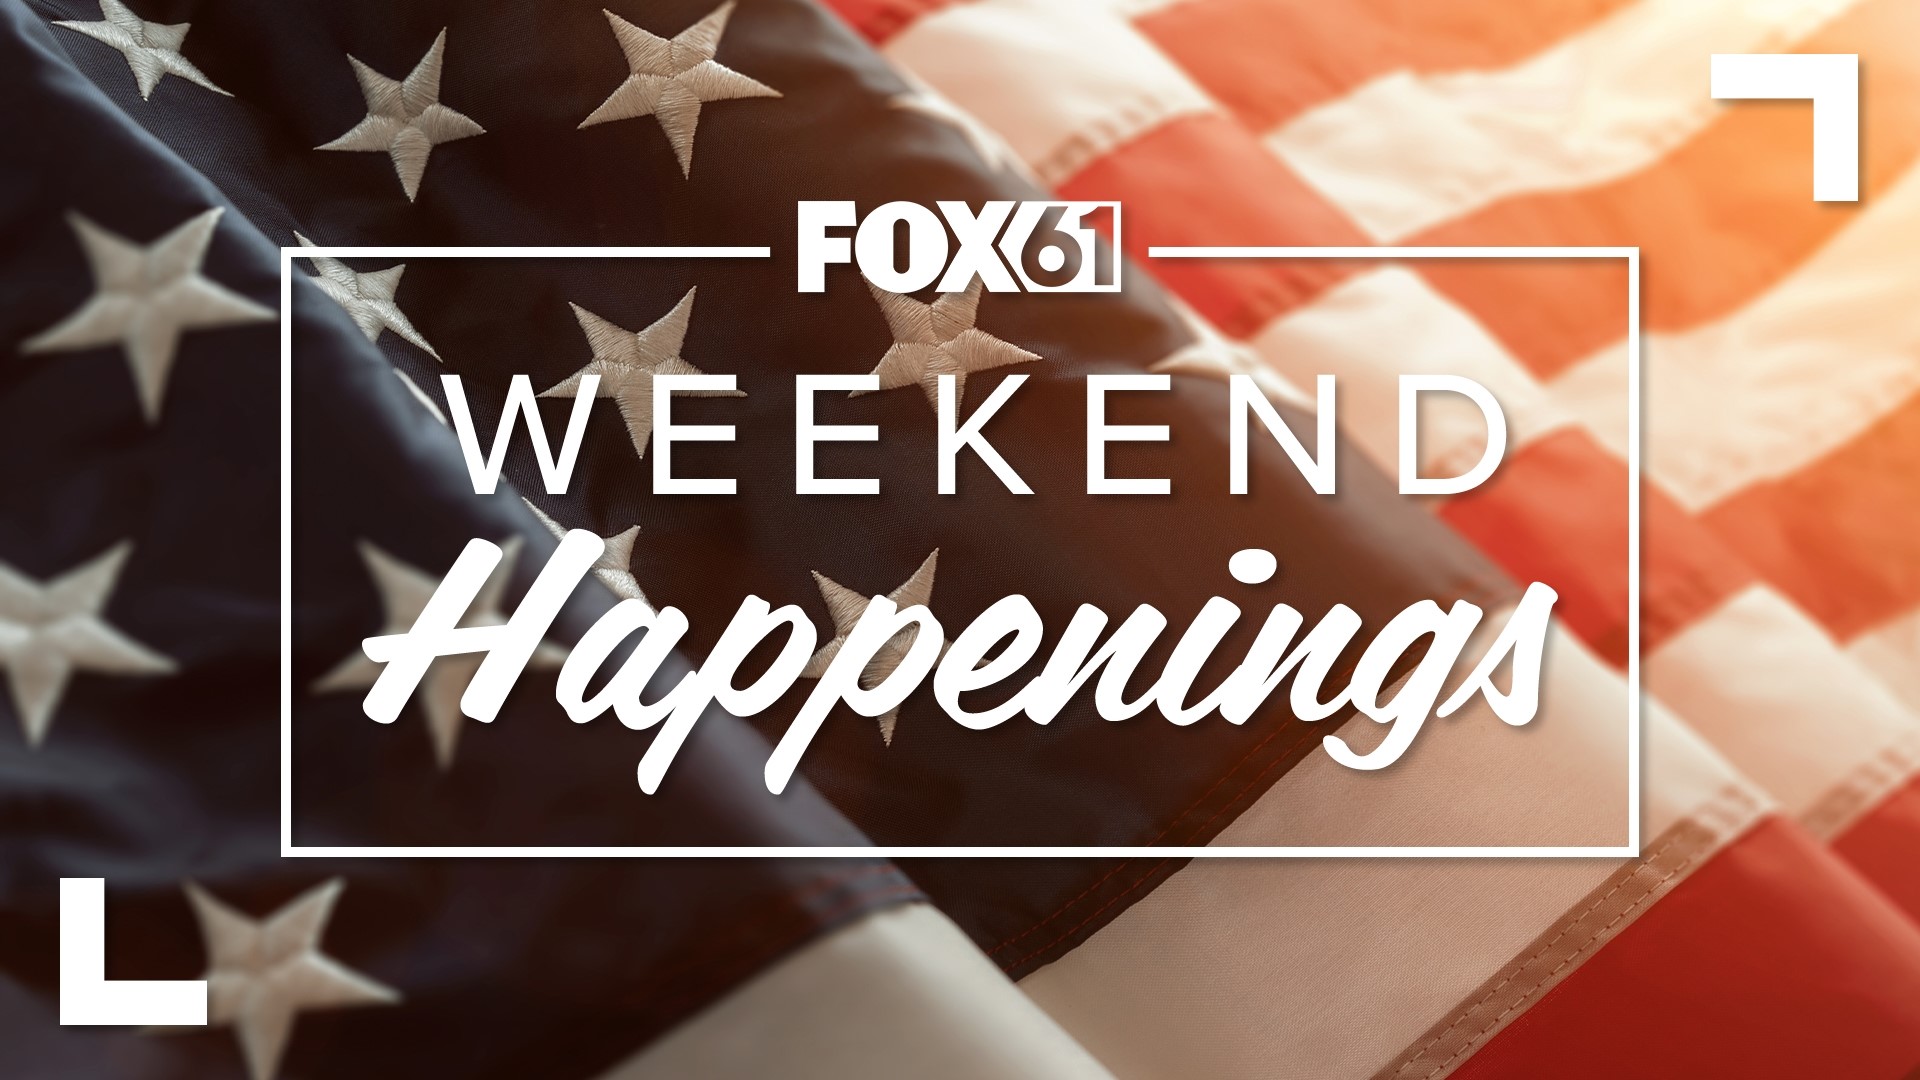 Fireworks, history, and parades will happen across the state this Fourth of July weekend! Here's what's happening in your neck of the woods to check out!